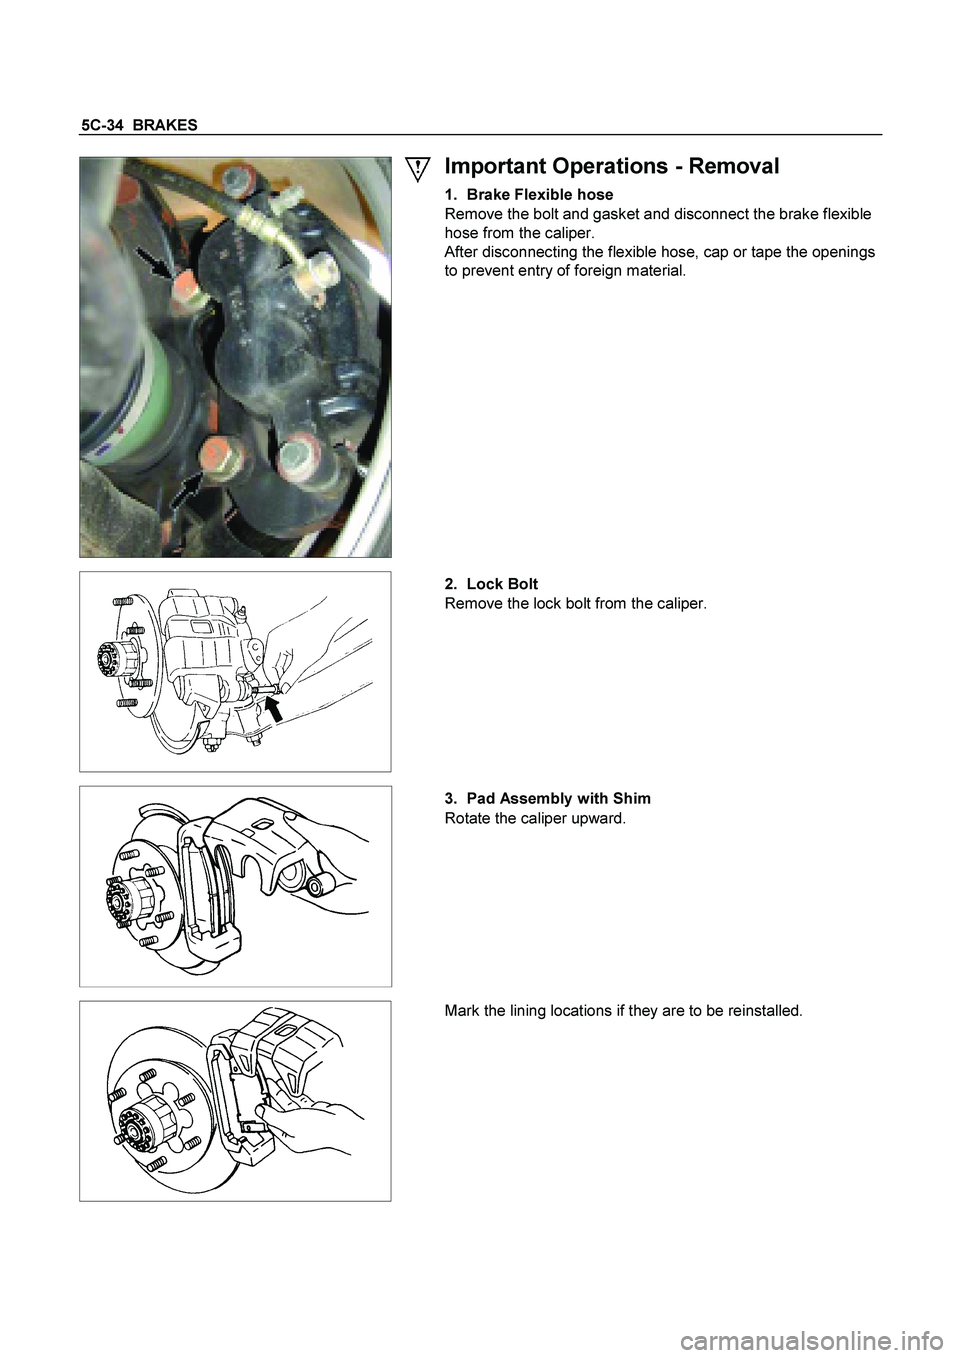 ISUZU TF SERIES 2004  Workshop Manual 5C-34  BRAKES
 
  
 
Important Operations - Removal 
1. Brake Flexible hose 
Remove the bolt and gasket and disconnect the brake flexible 
hose from the caliper. 
After disconnecting the flexible hose